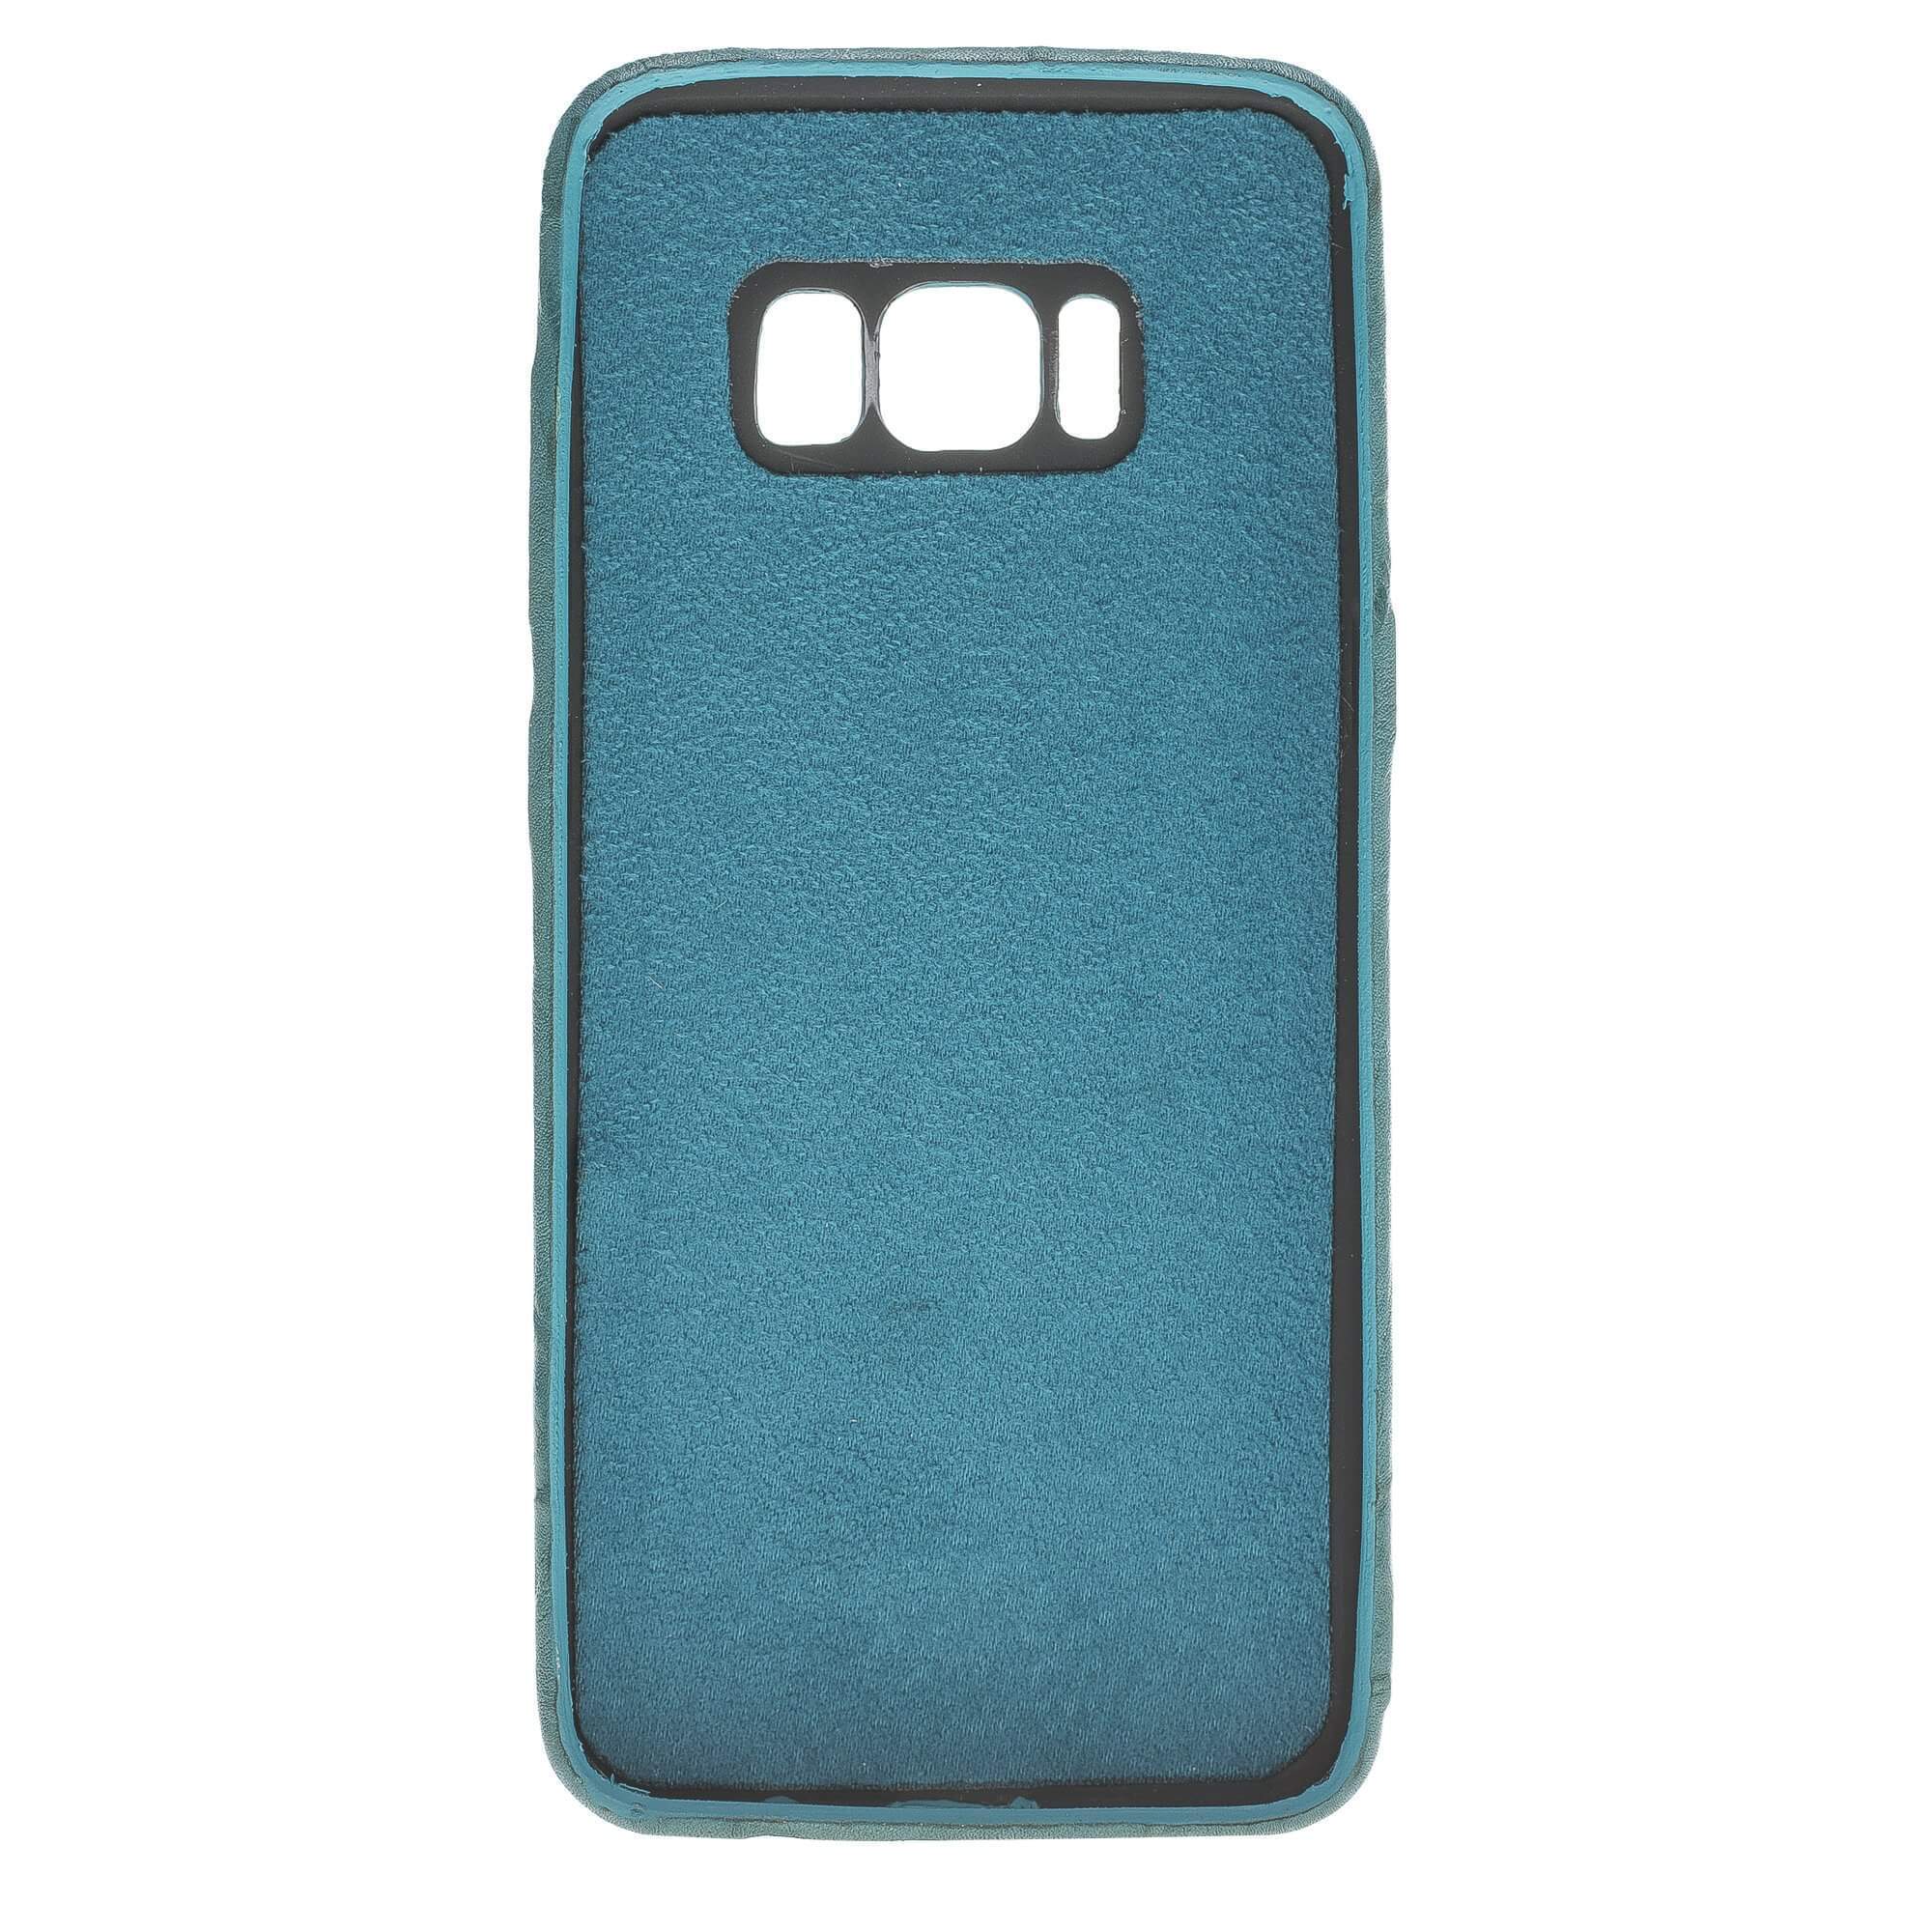 Phone Case Leather Ultra Cover with Credit Card Slots for Samsung S8  - Creased Turquoise Bouletta Shop